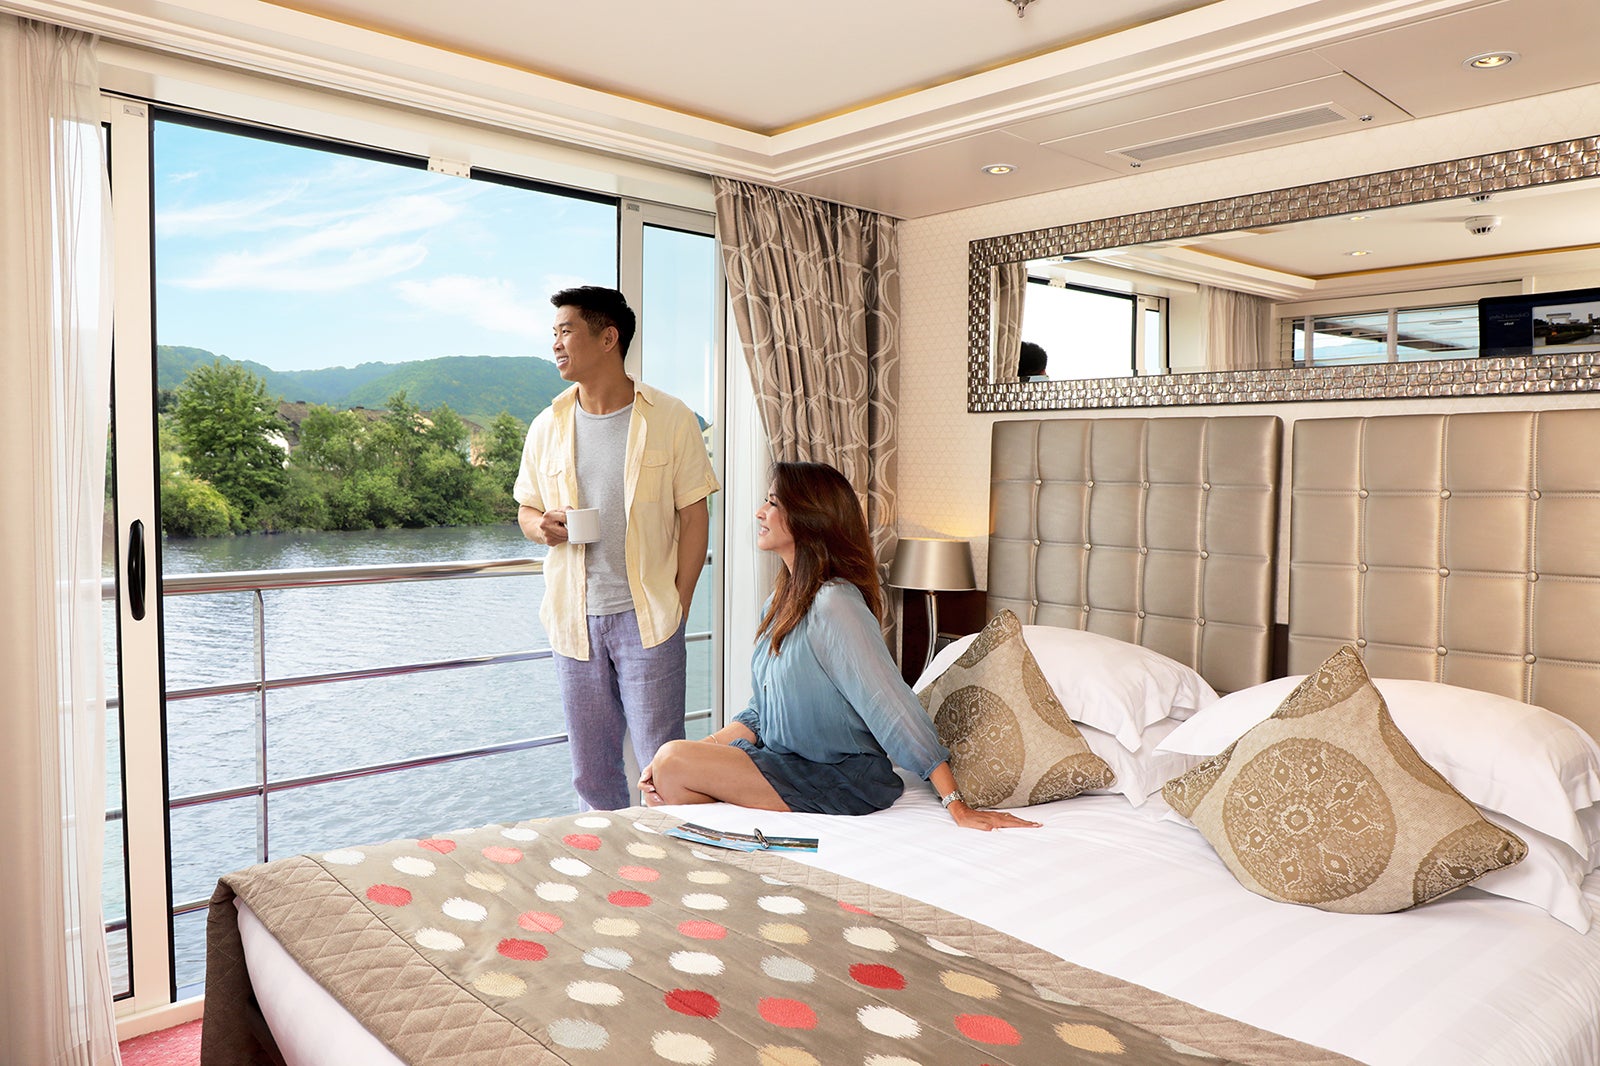 River cruise packing list: What to pack when traveling by riverboat